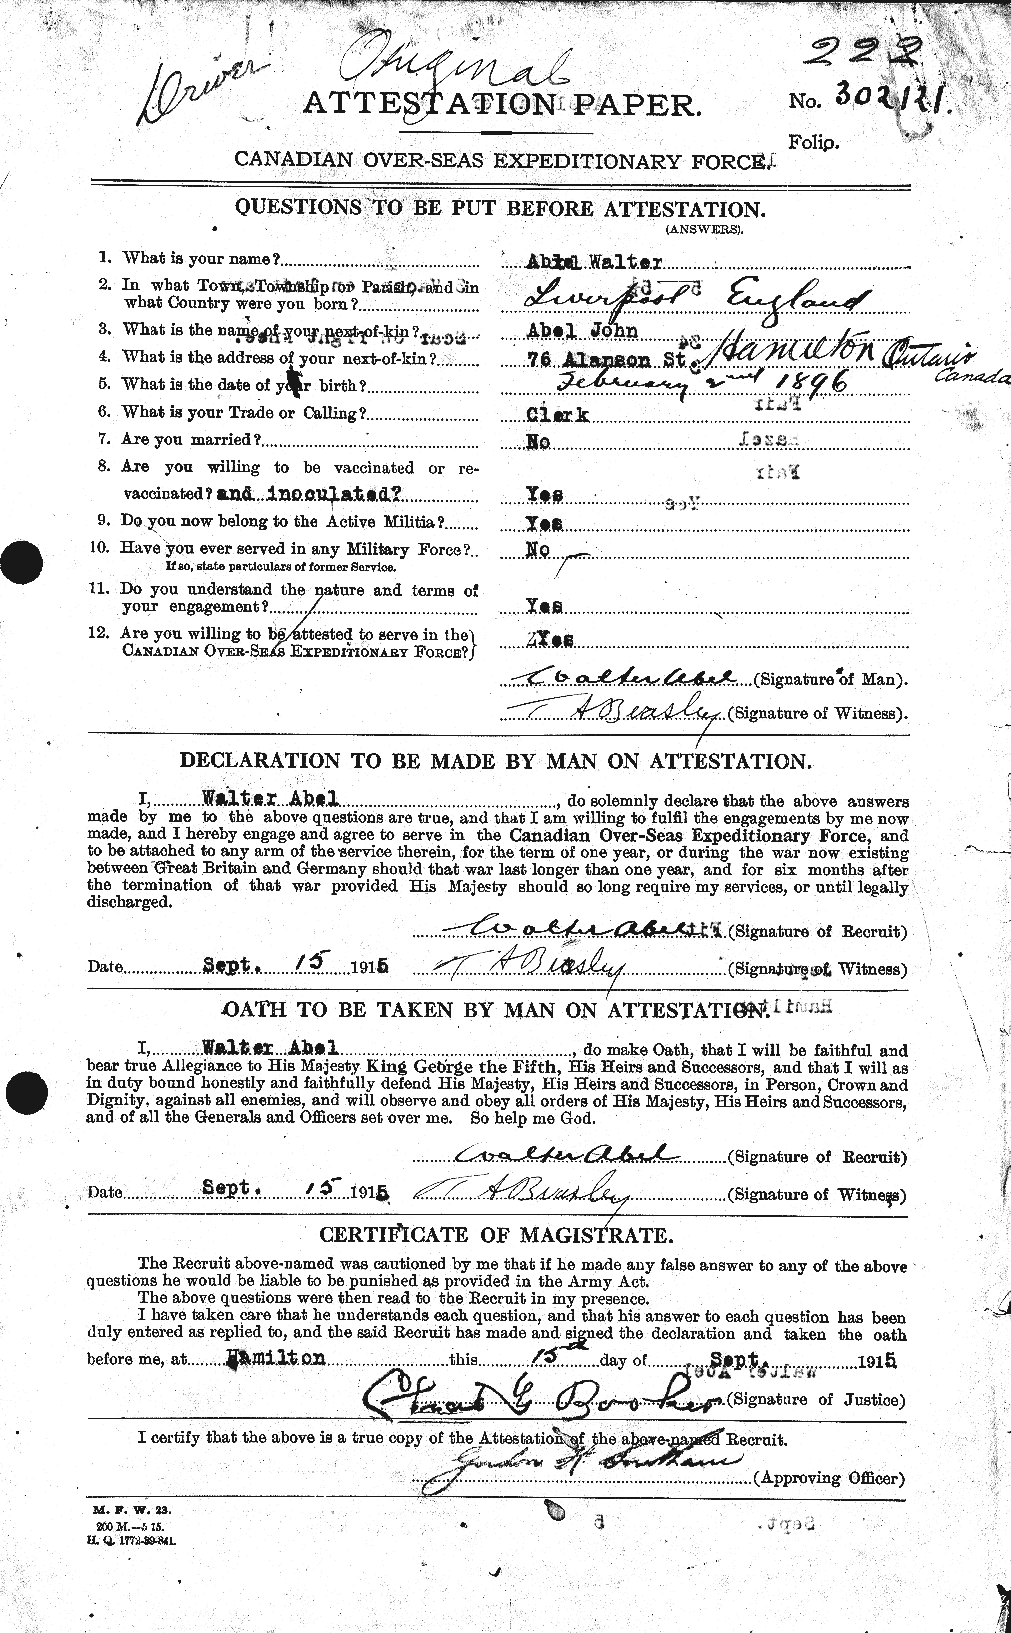 Personnel Records of the First World War - CEF 201454a